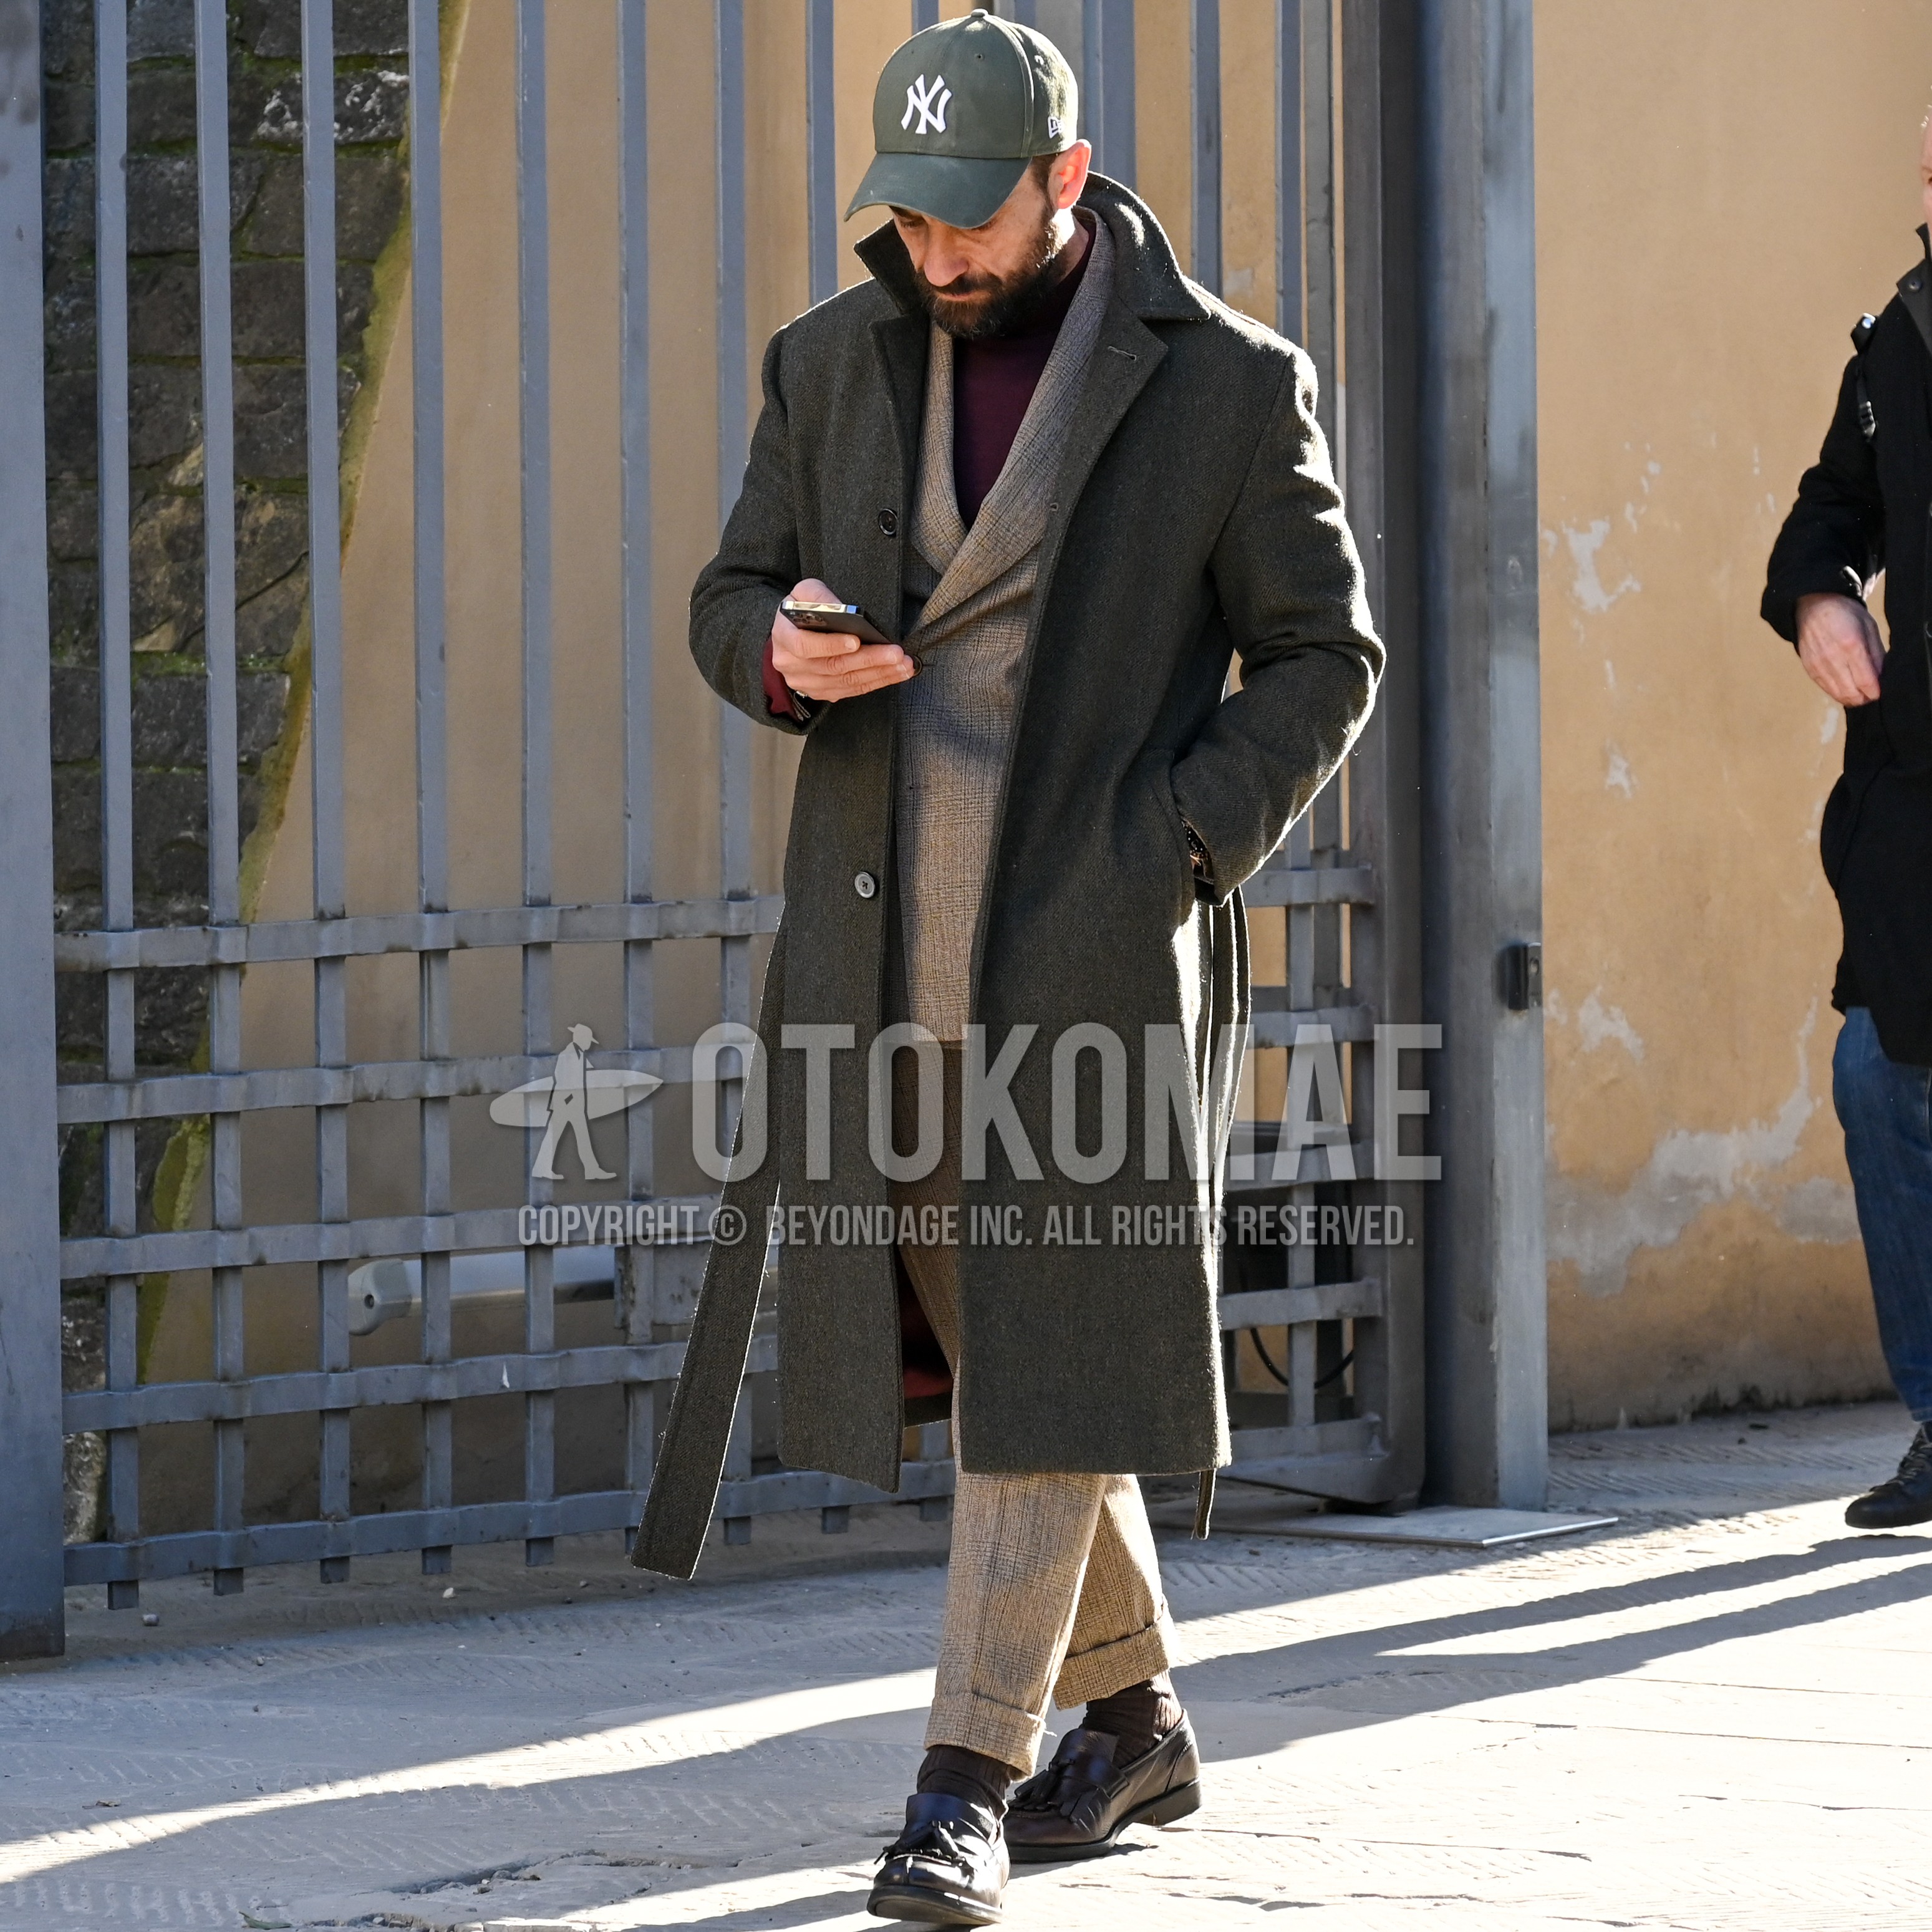 Men's autumn winter outfit with gray one point baseball cap, dark gray plain belted coat, brown plain sweater, brown plain socks, black tassel loafers leather shoes, beige check suit.